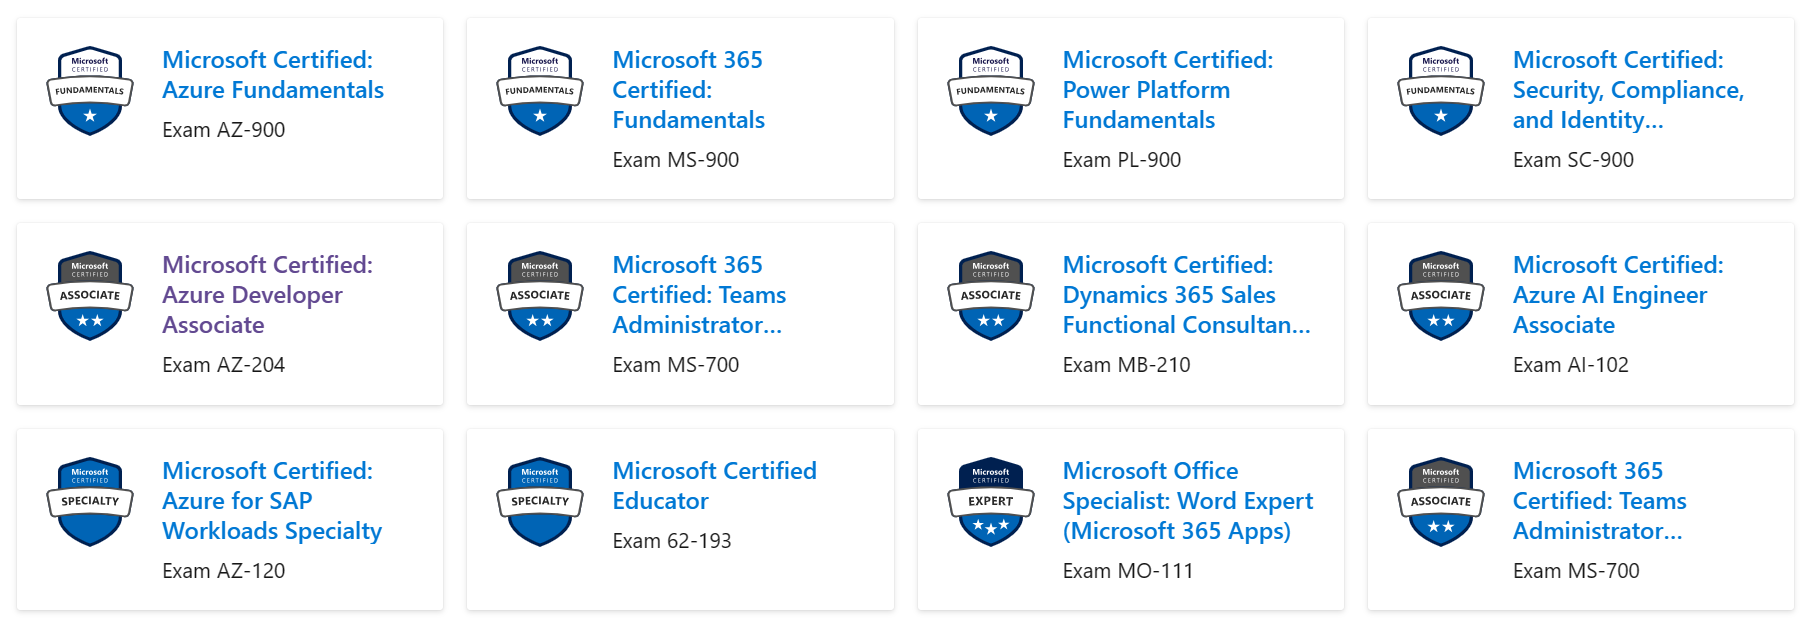 Exciting update for Microsoft certification exams